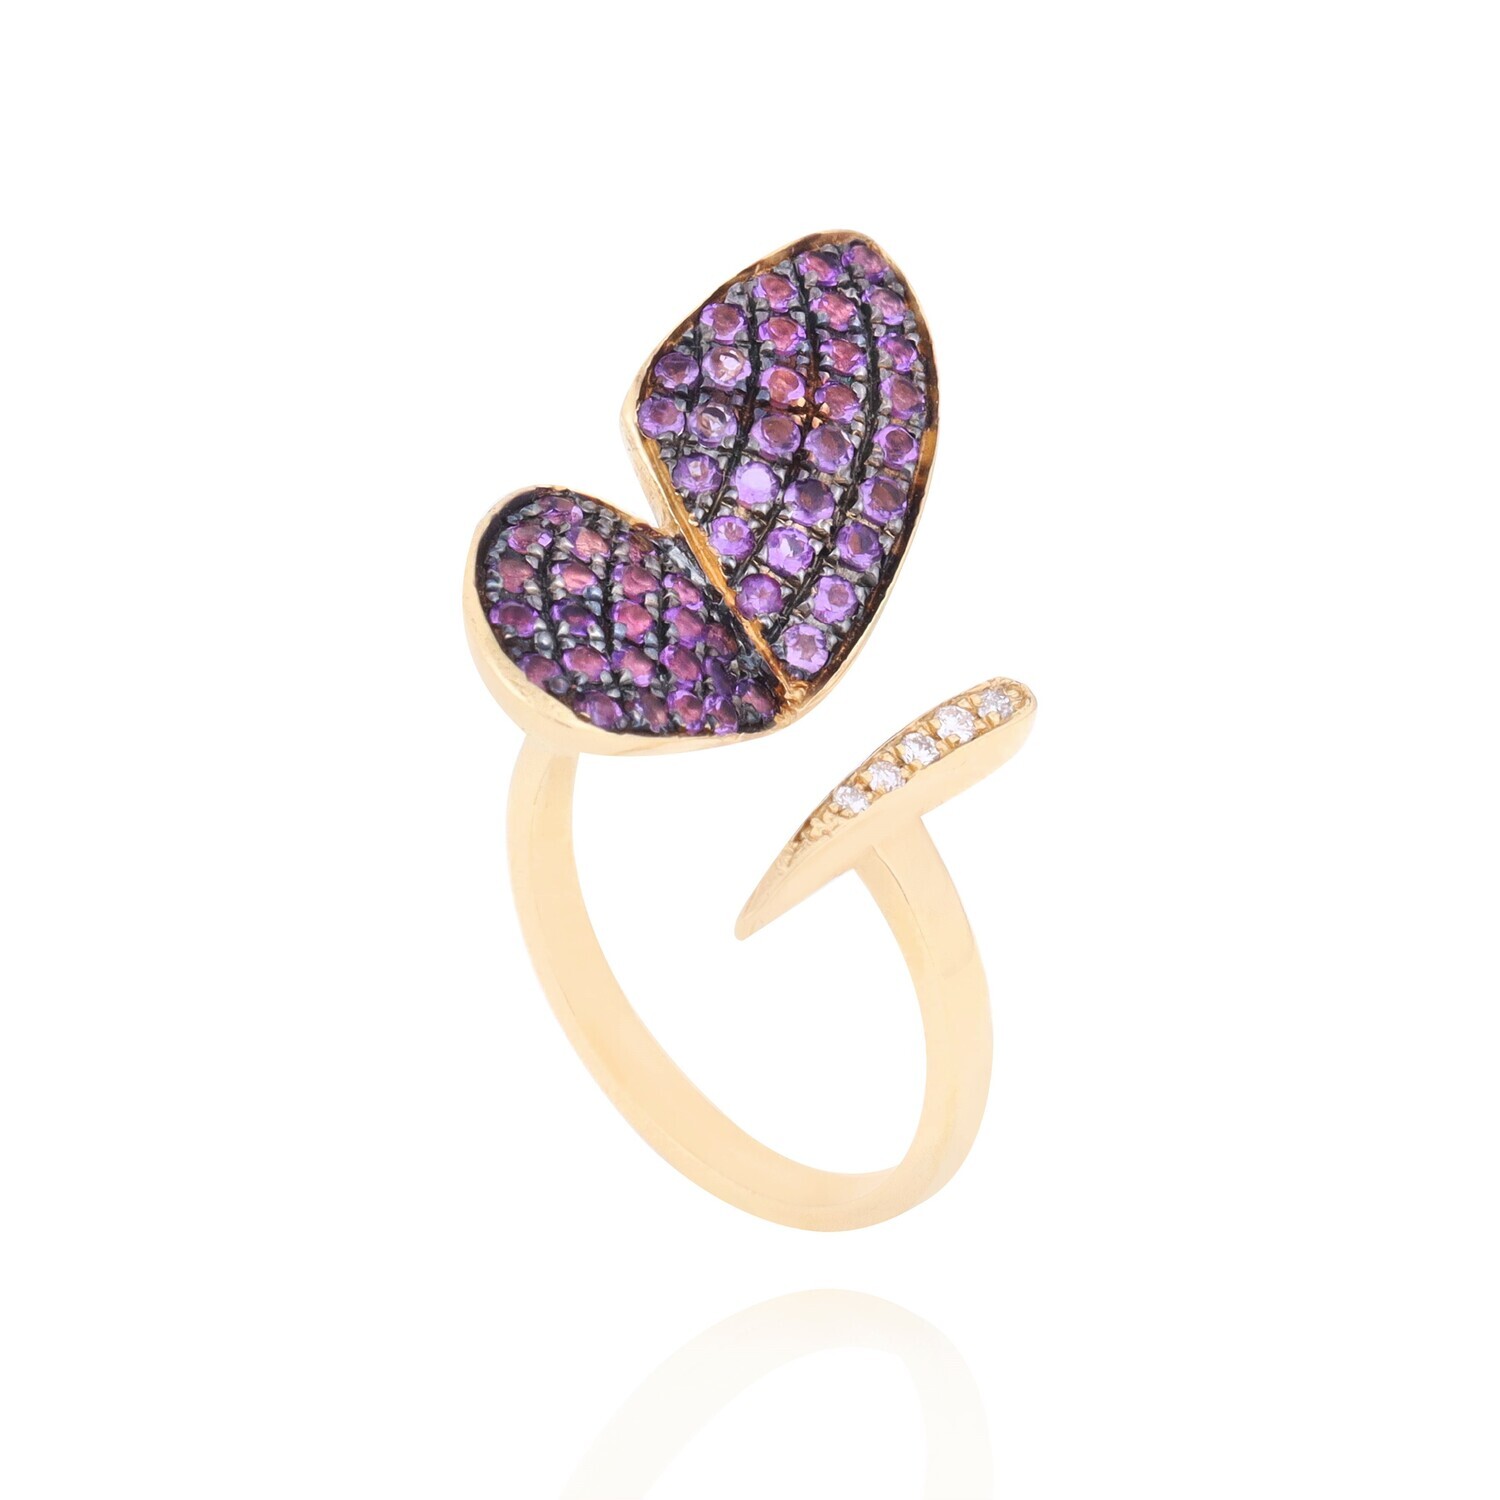 Butterfly Diamond Ring with Precious Colored Stones